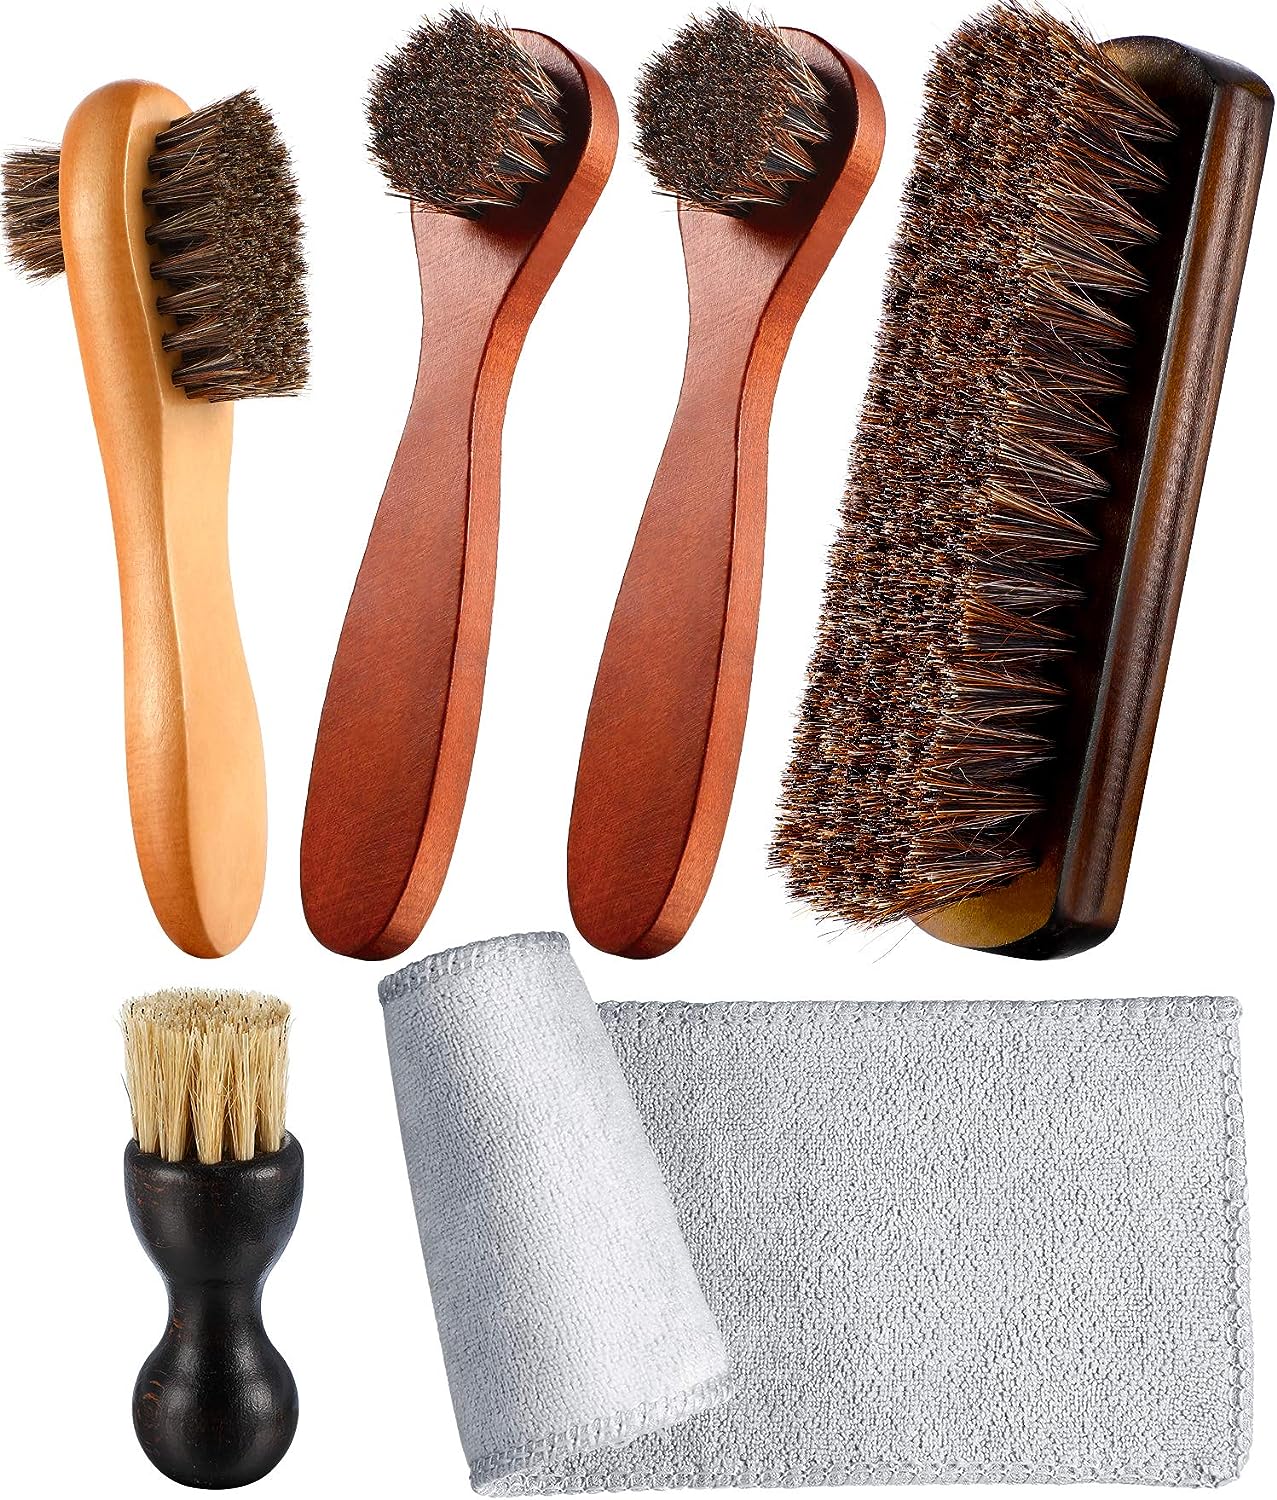 Youngjoy 6 Pieces Horsehair Shine Shoes Brush Kit [...]